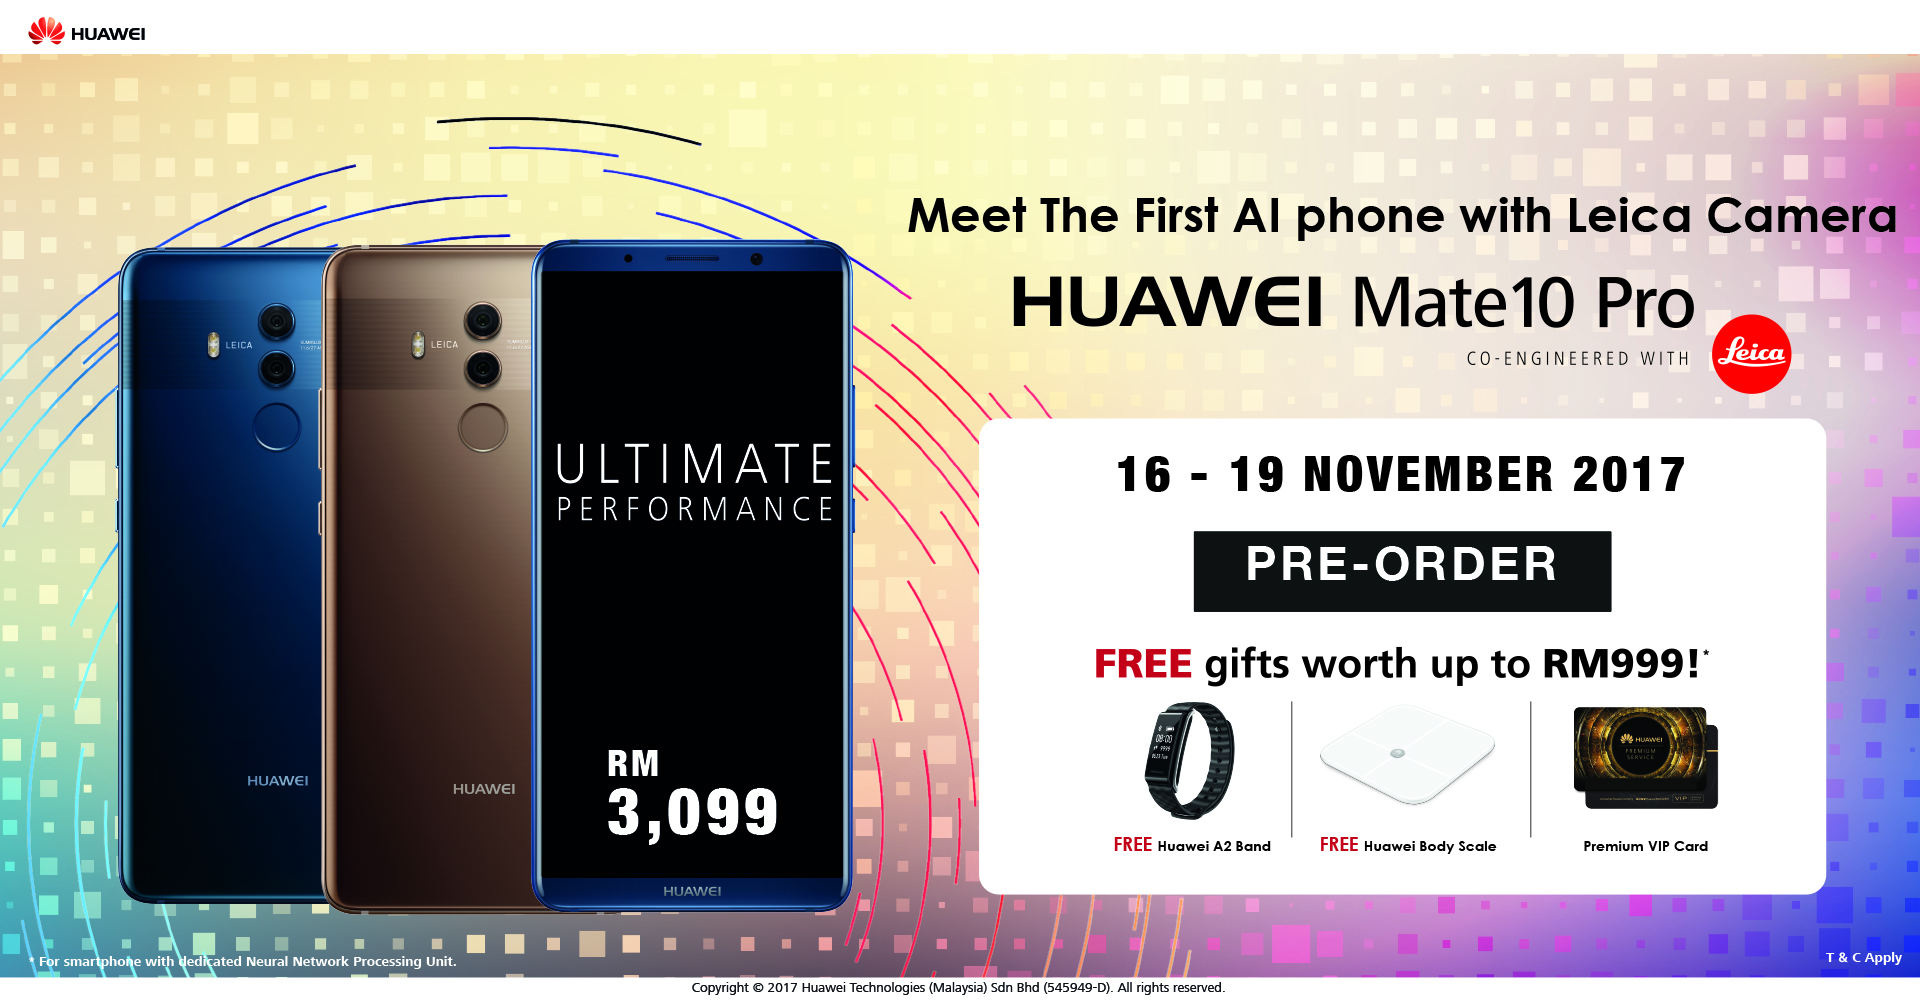 Huawei Mate 10 Pro pre-order officially announced from 16 November 2017 for RM3099 + freebies worth RM999